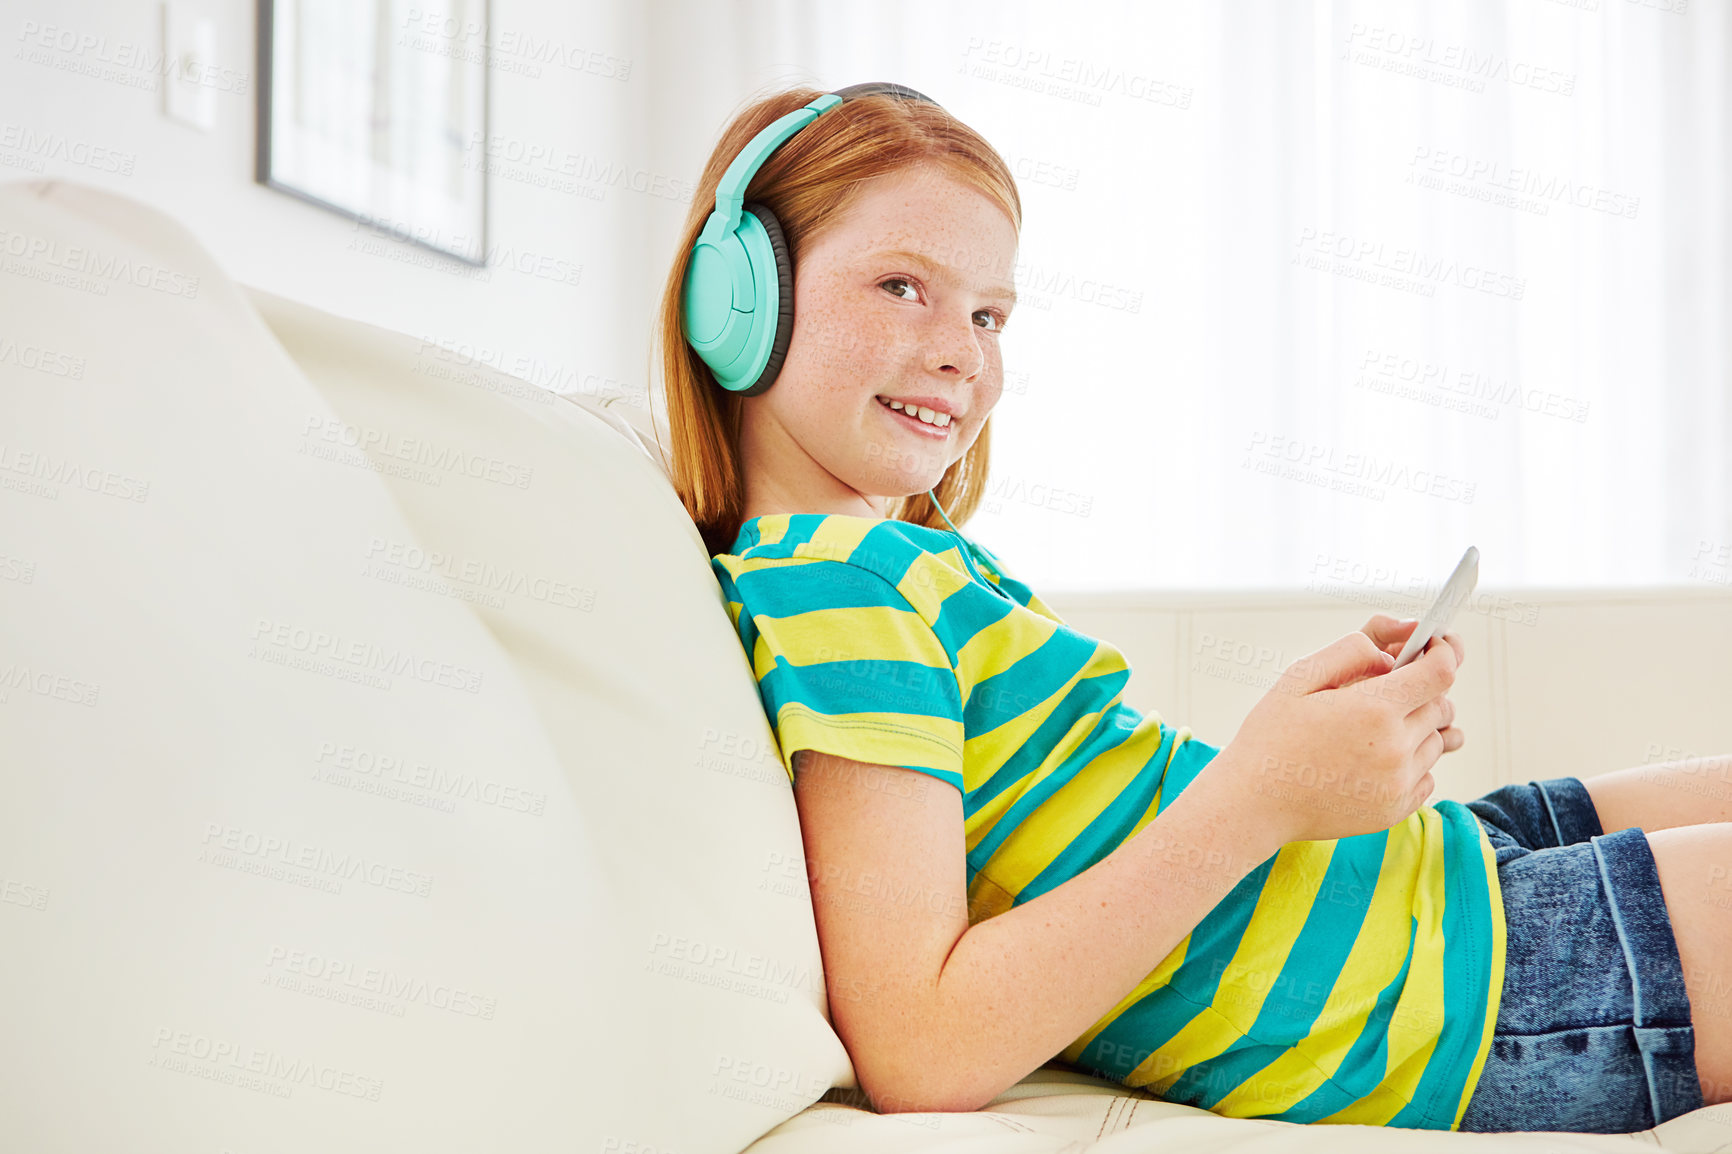 Buy stock photo Shot of a little girl using a digital tablet with headphones at home